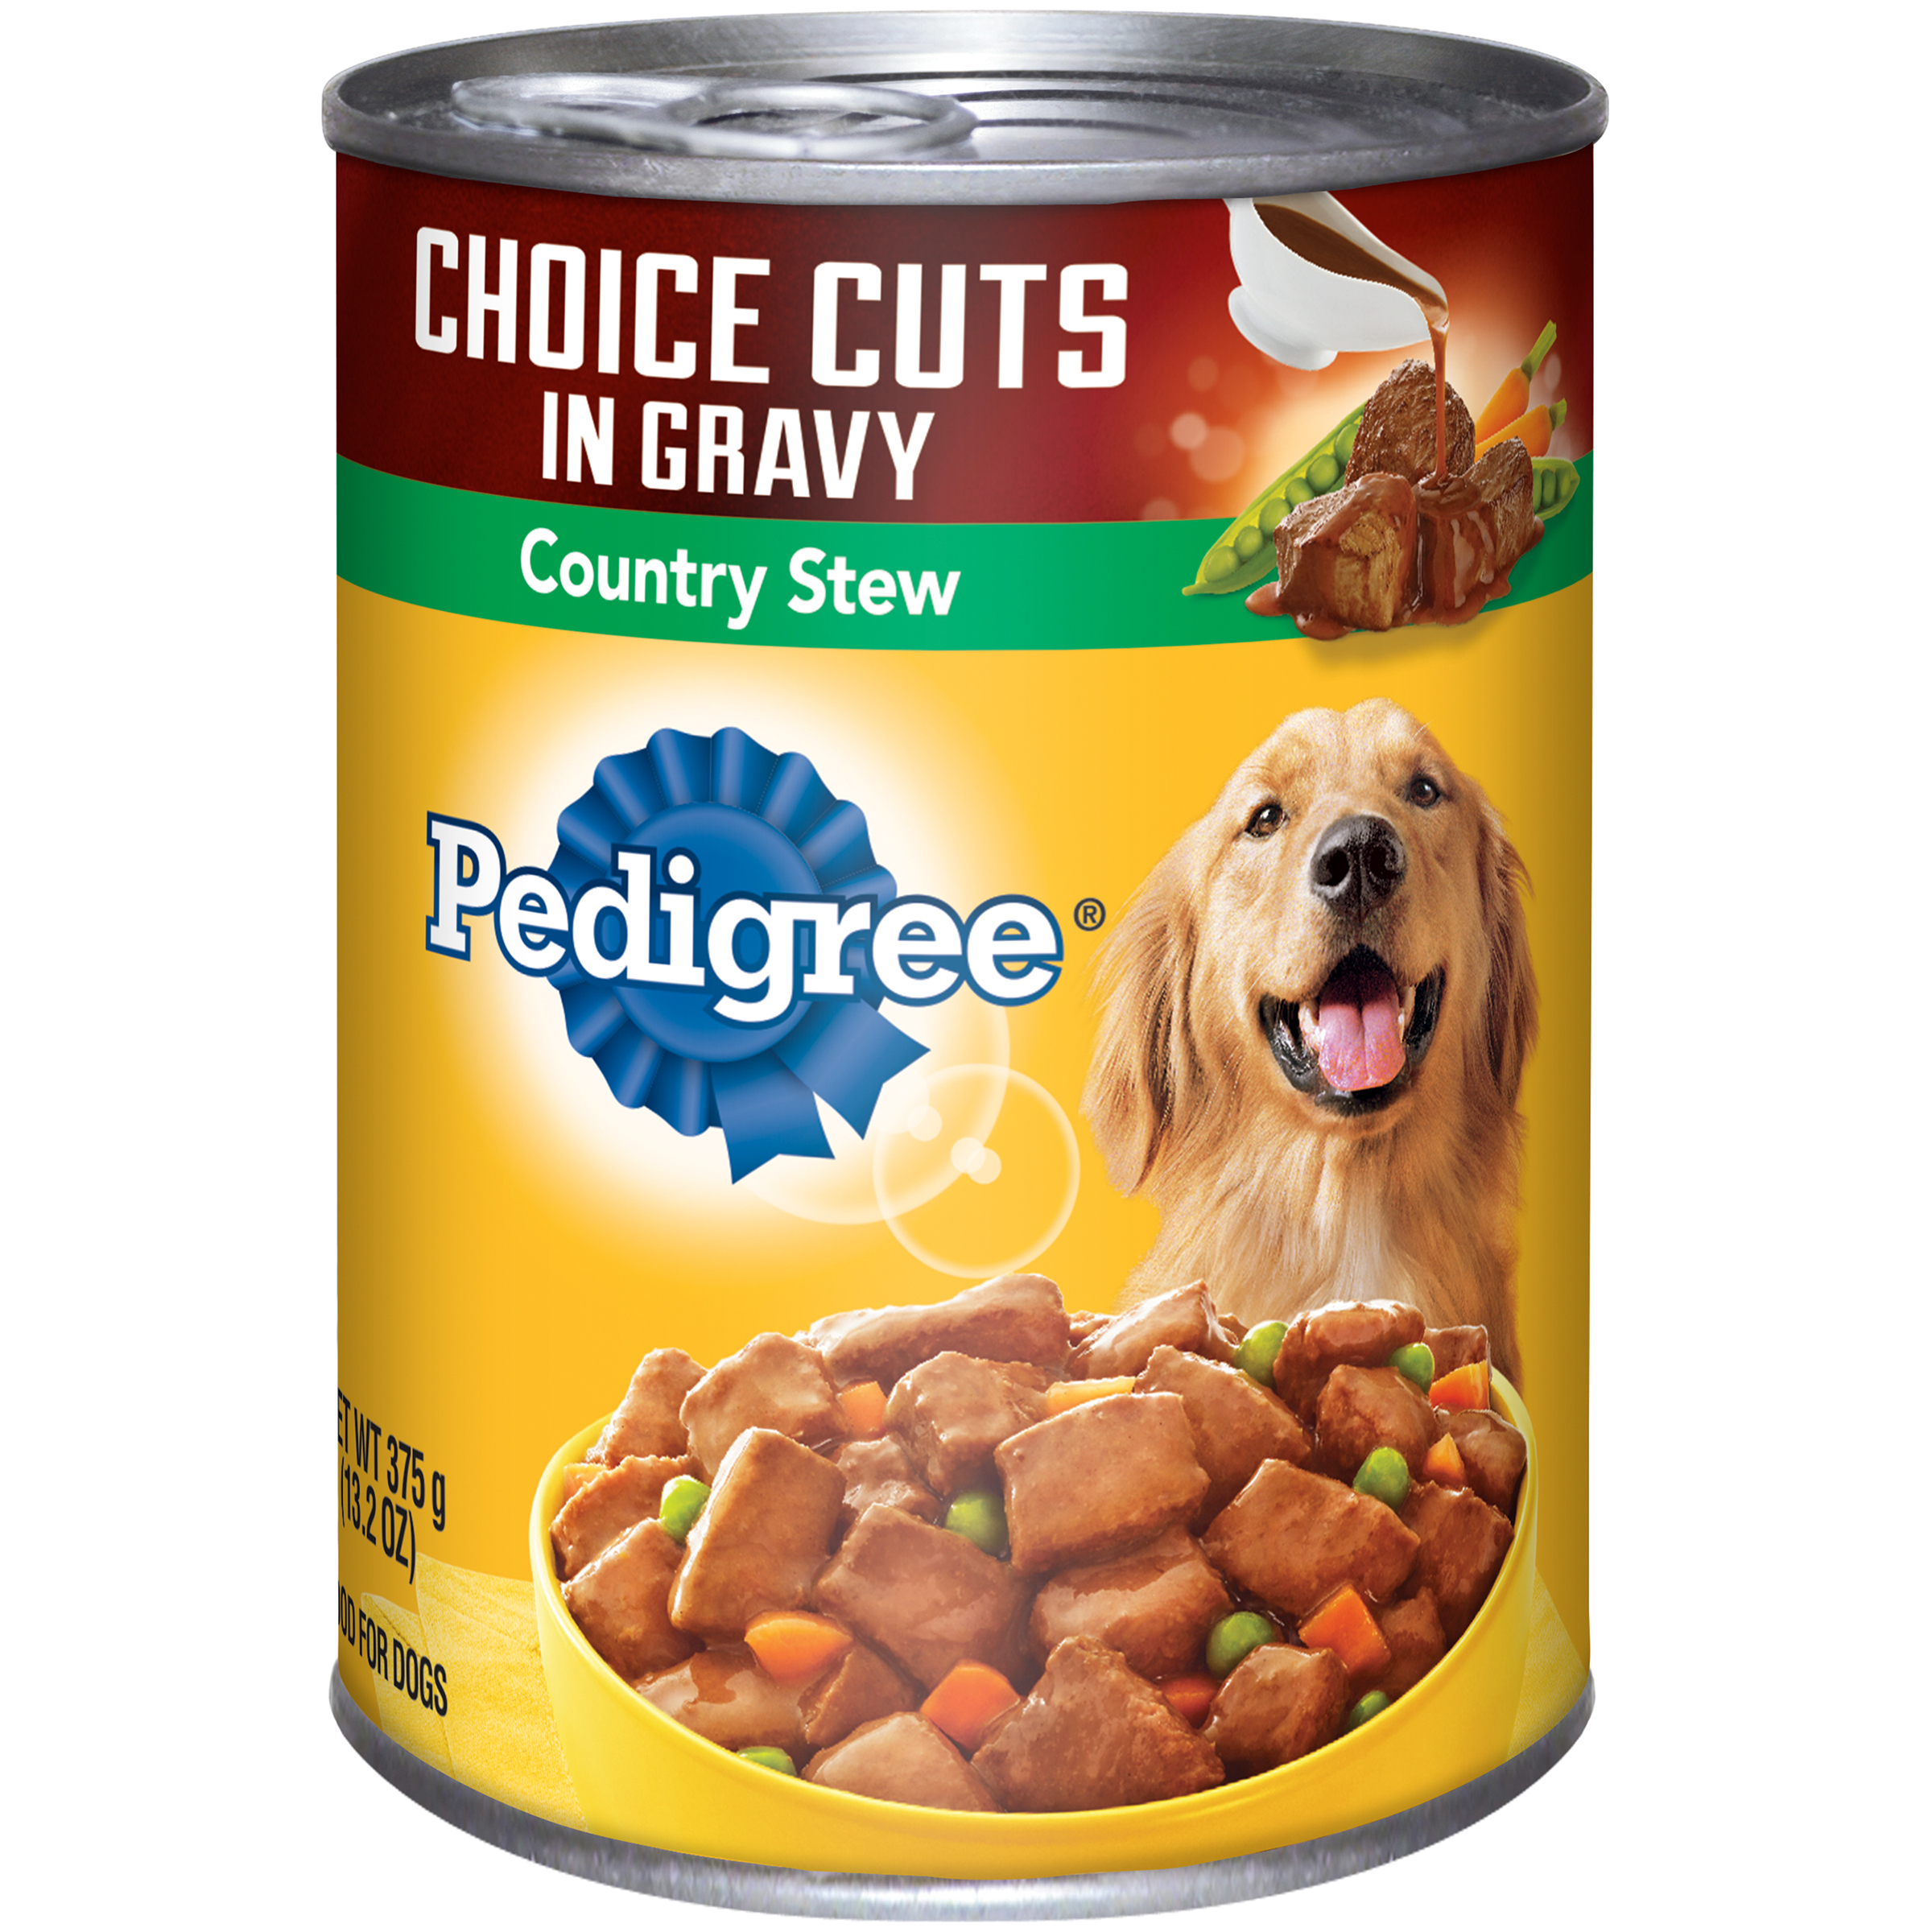 Pedigree Food for Adult Dogs, Country Stew, 13.2 fl oz (375 g)